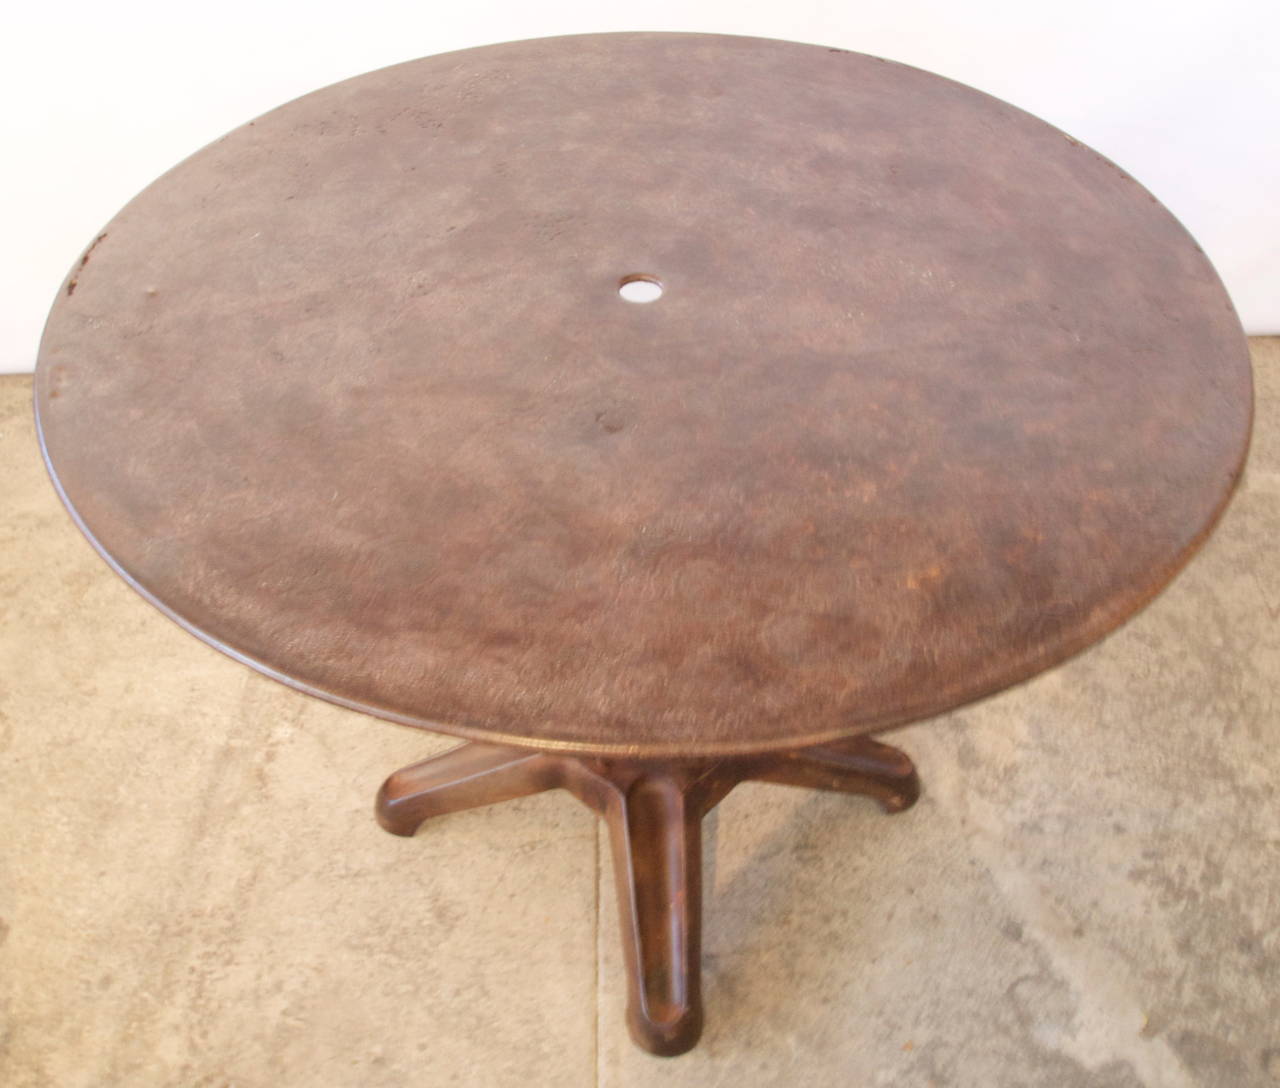 French Industrial metal round garden table with a sculptural base and beautiful patina, late 19th-early 20th century.